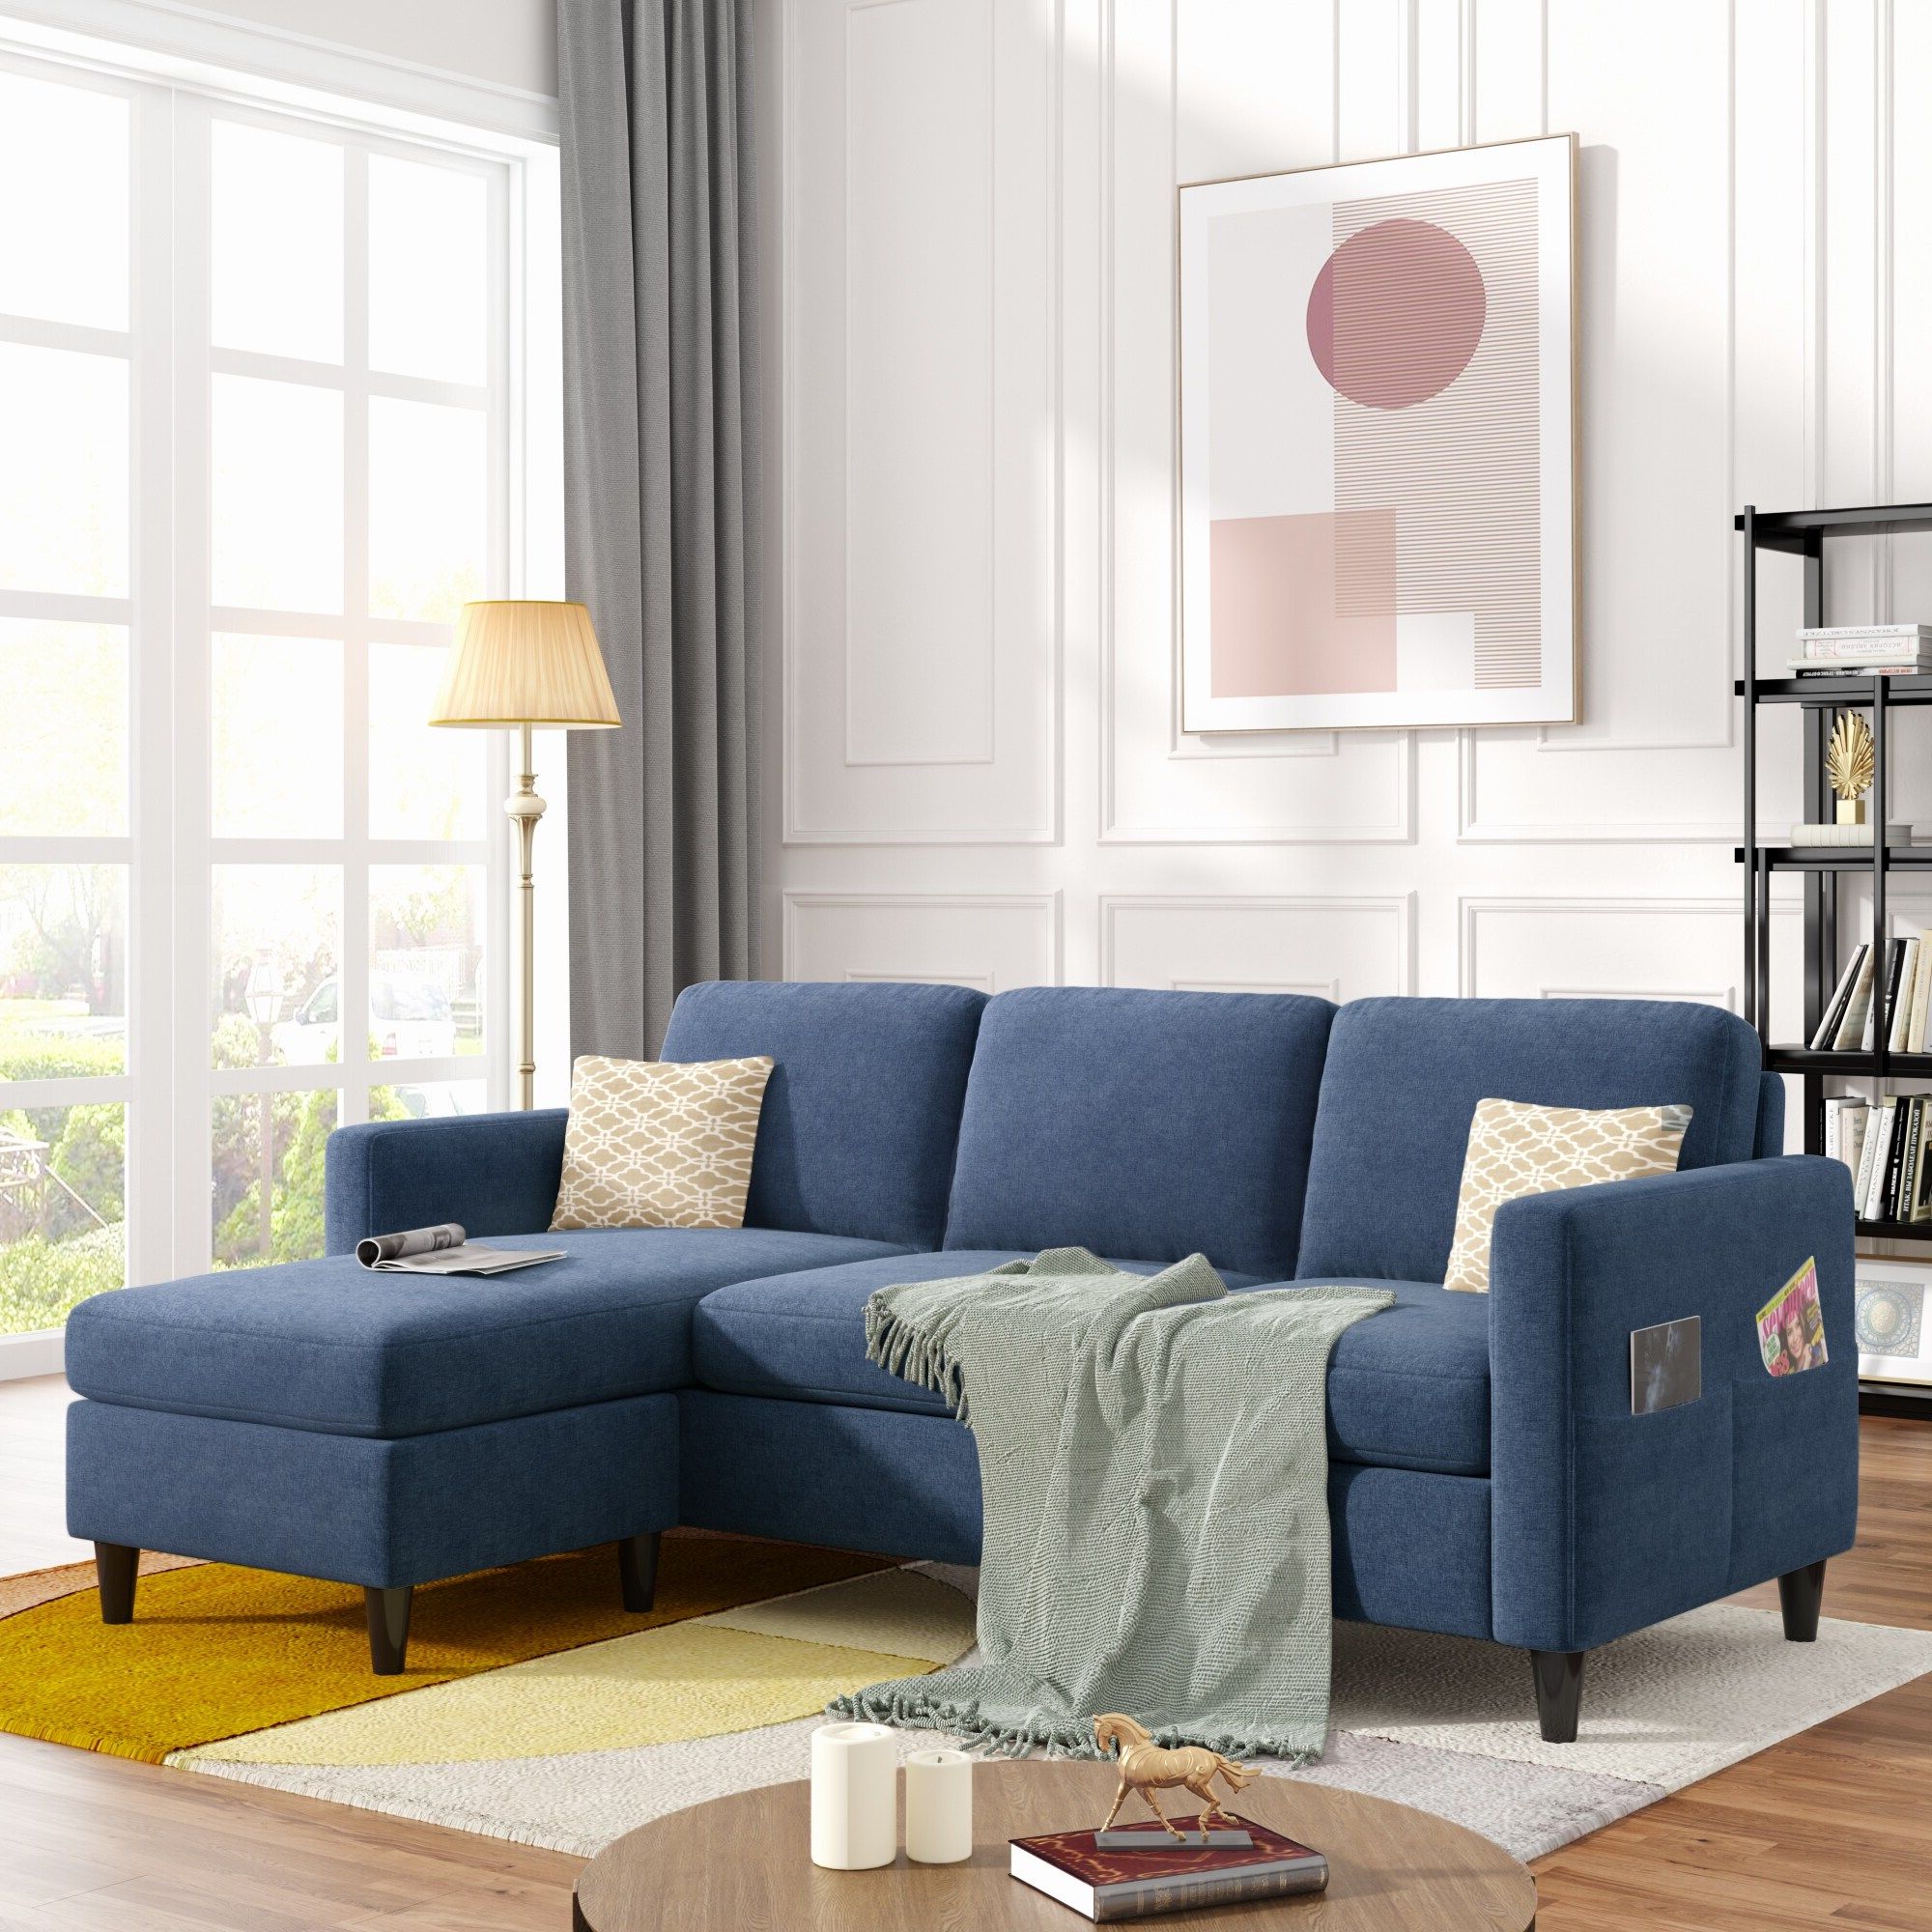 Reversible Sectional Sofa,l Shape 3 Seater Couch With Storage,blue –  Overstock – 37563704 Intended For 3 Seat Sofa Sectionals With Reversible Chaise (View 3 of 20)